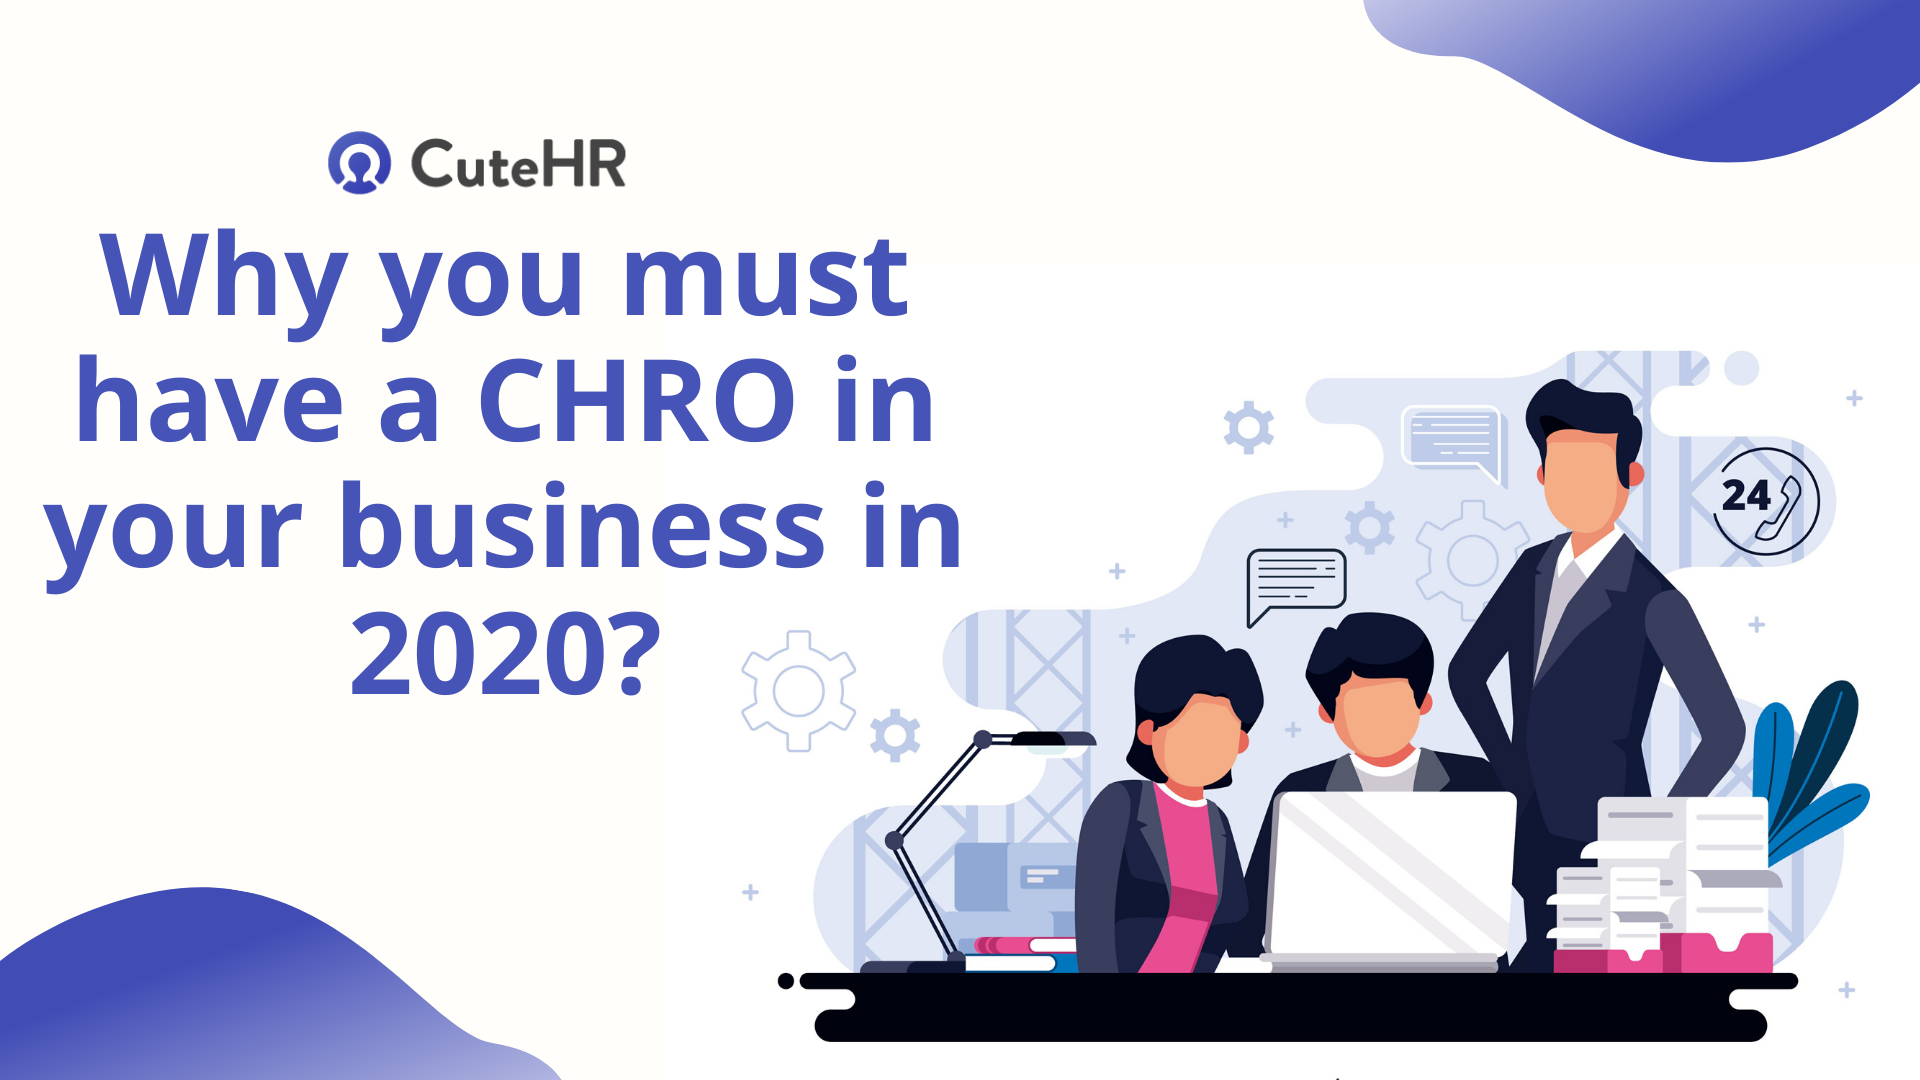 chro in business